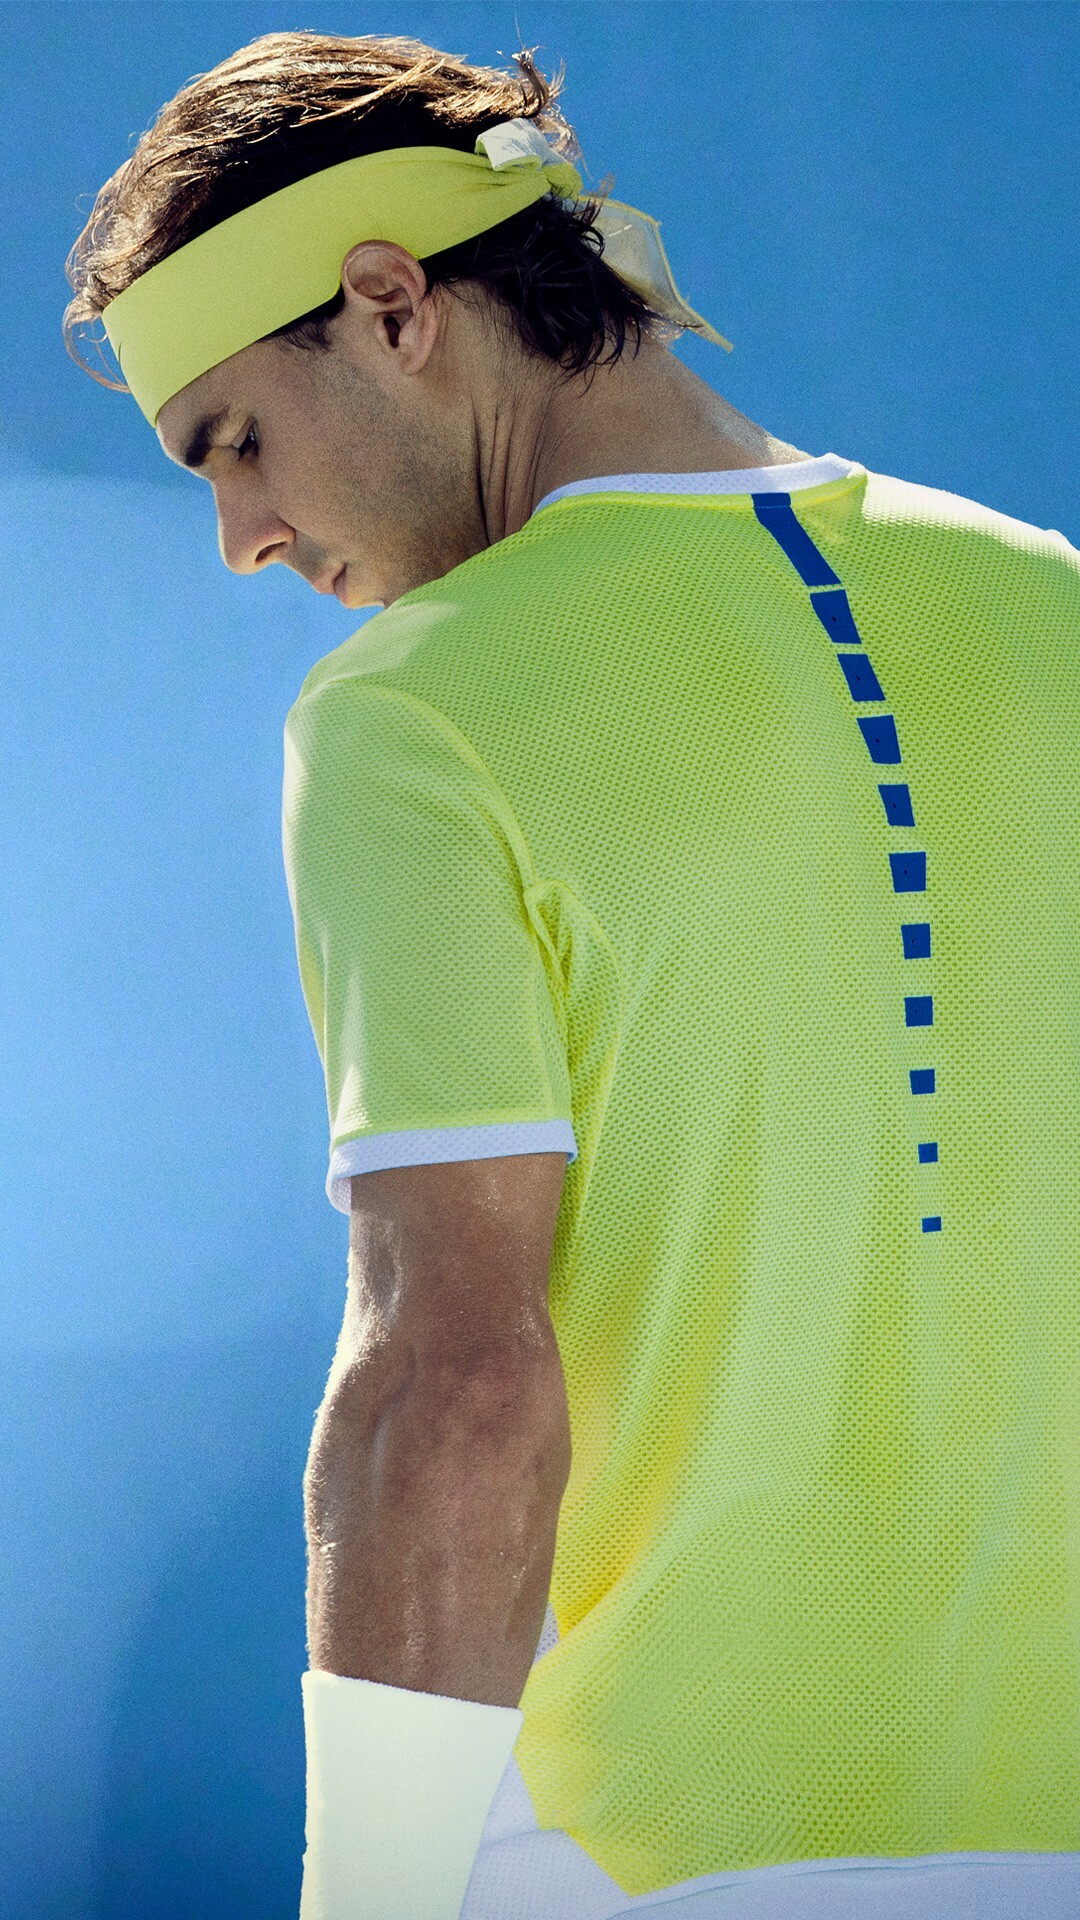 Rafael Nadal: He clinched the ATP world No. 1 ranking on 18 August 2008. 1080x1920 Full HD Wallpaper.